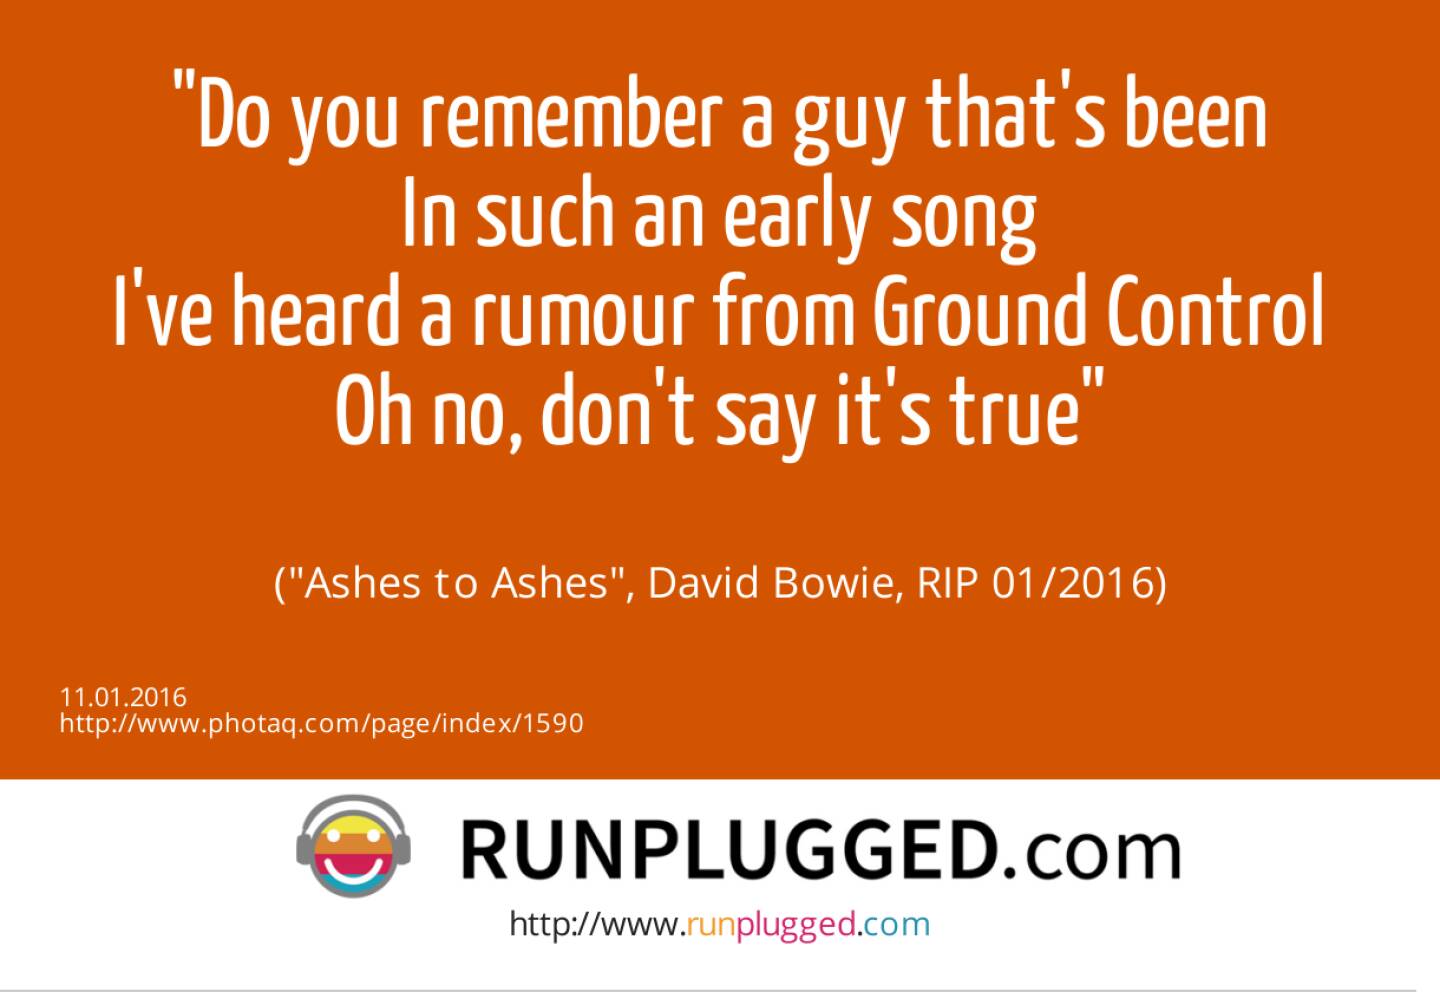 11.1. Do you remember a guy that's been<br>In such an early song<br>I've heard a rumour from Ground Control<br>Oh no, don't say it's true<br><br> (Ashes to Ashes, David Bowie, RIP 01/2016)